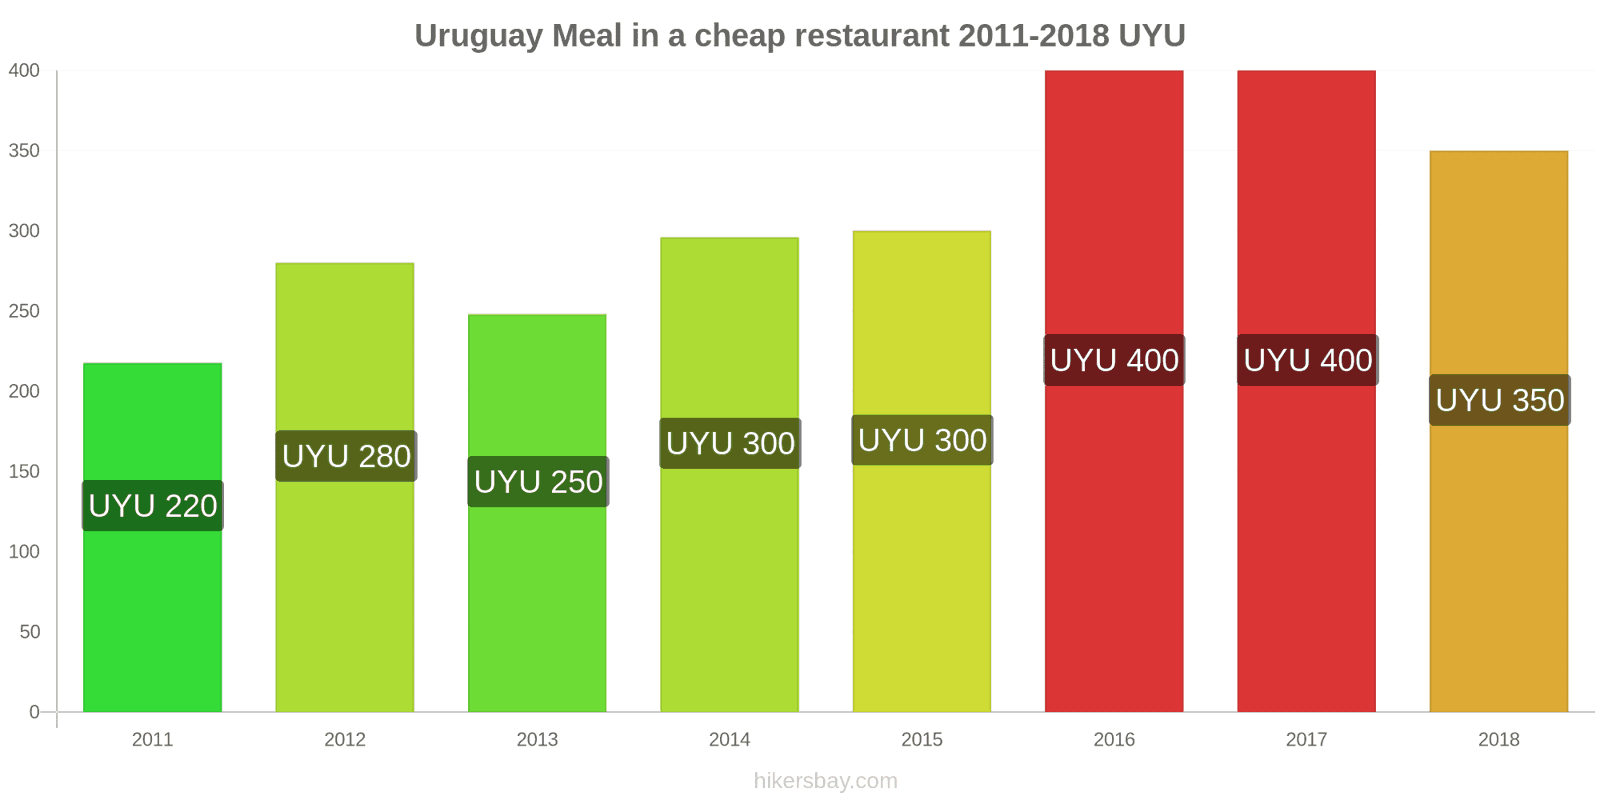 Uruguay price changes Meal in a cheap restaurant hikersbay.com